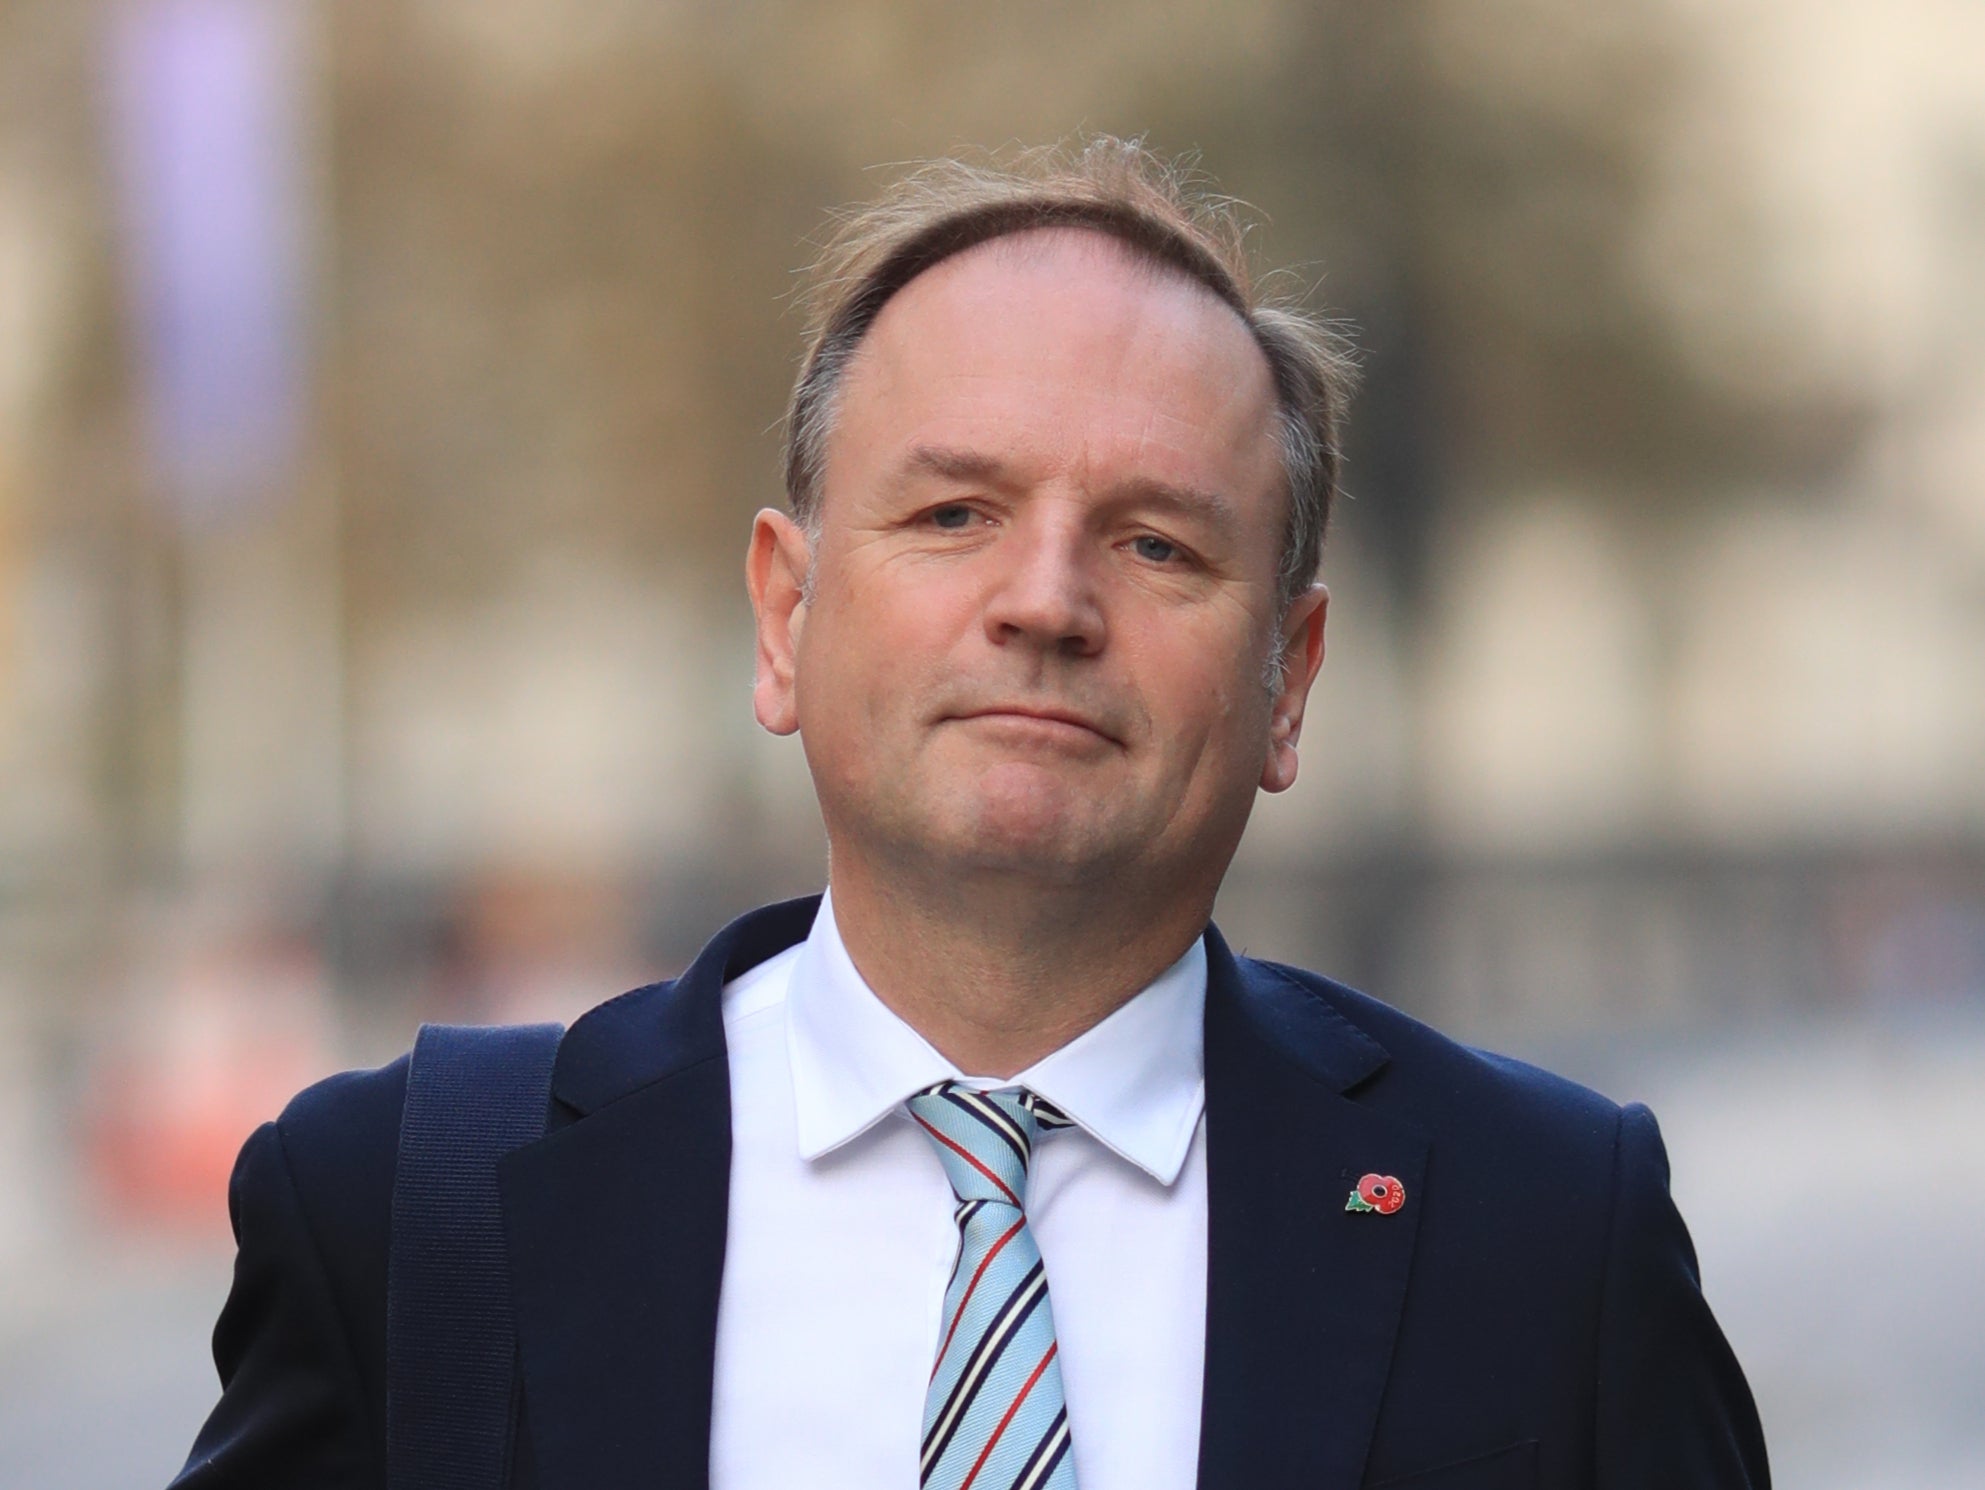 Sir Simon Stevens is due to step down from his role as NHS England chief executive next month